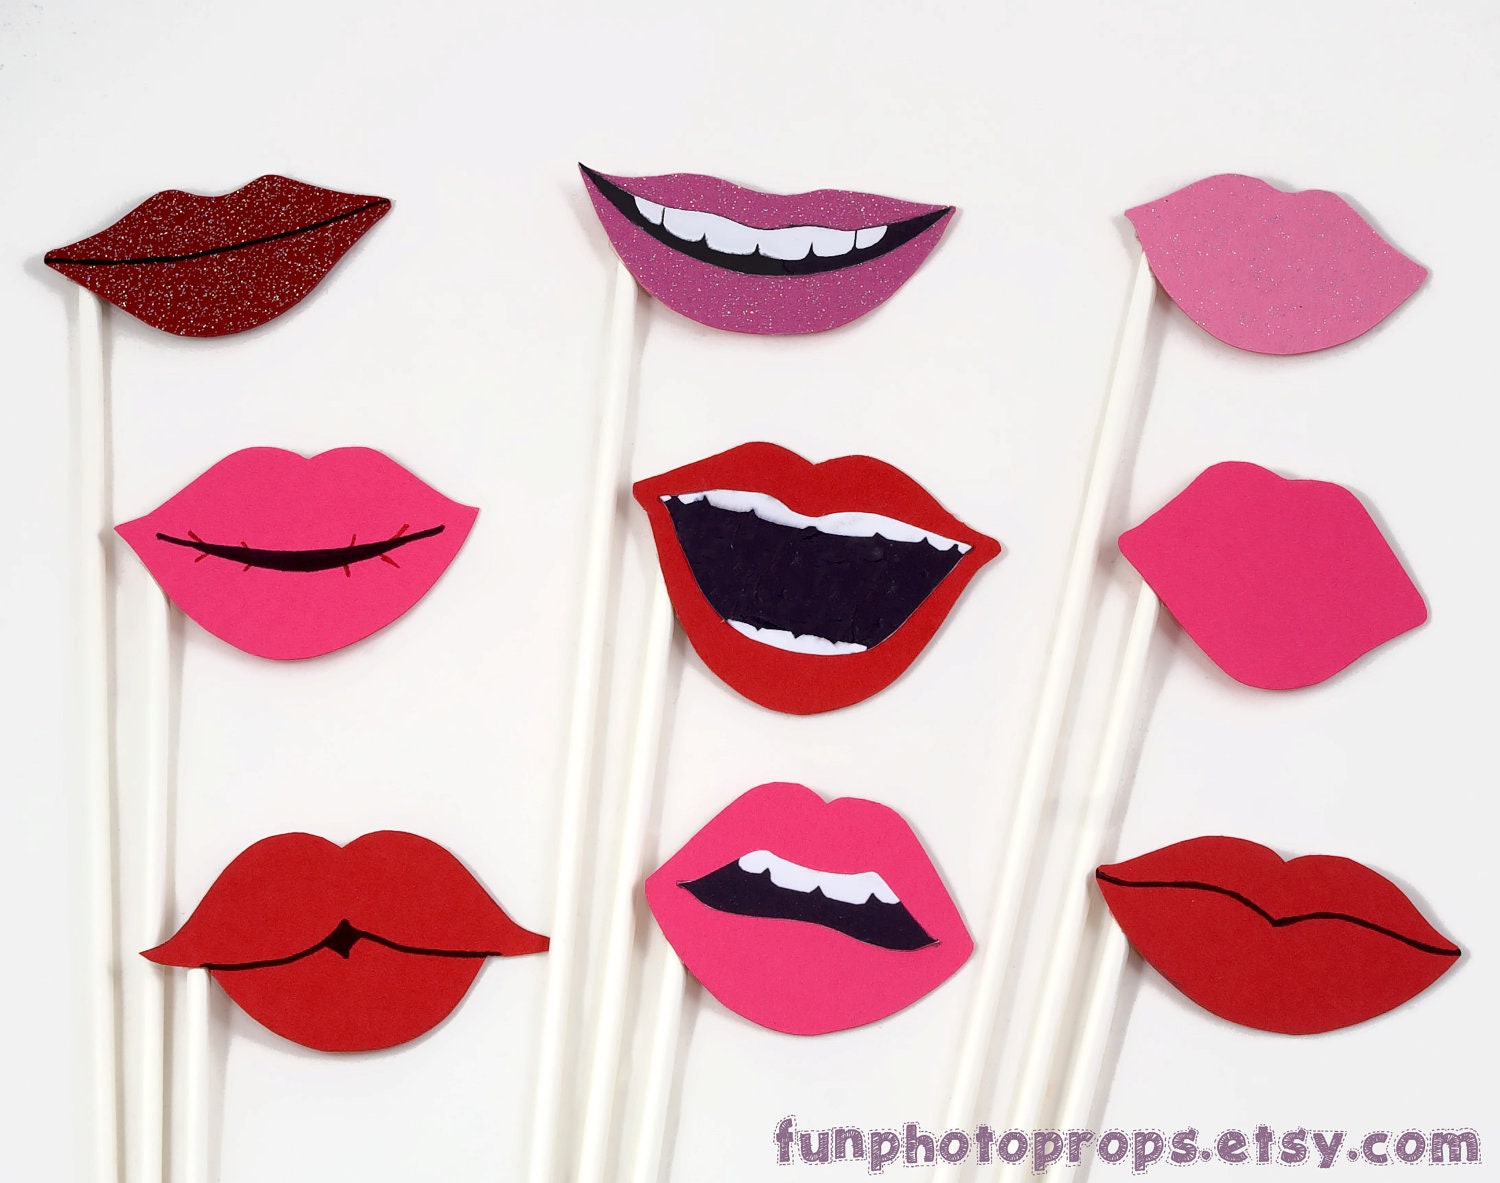 Items Similar To Photo Booth Props 9 Piece Lips Photo Booth Prop Set Photobooth Props On Etsy